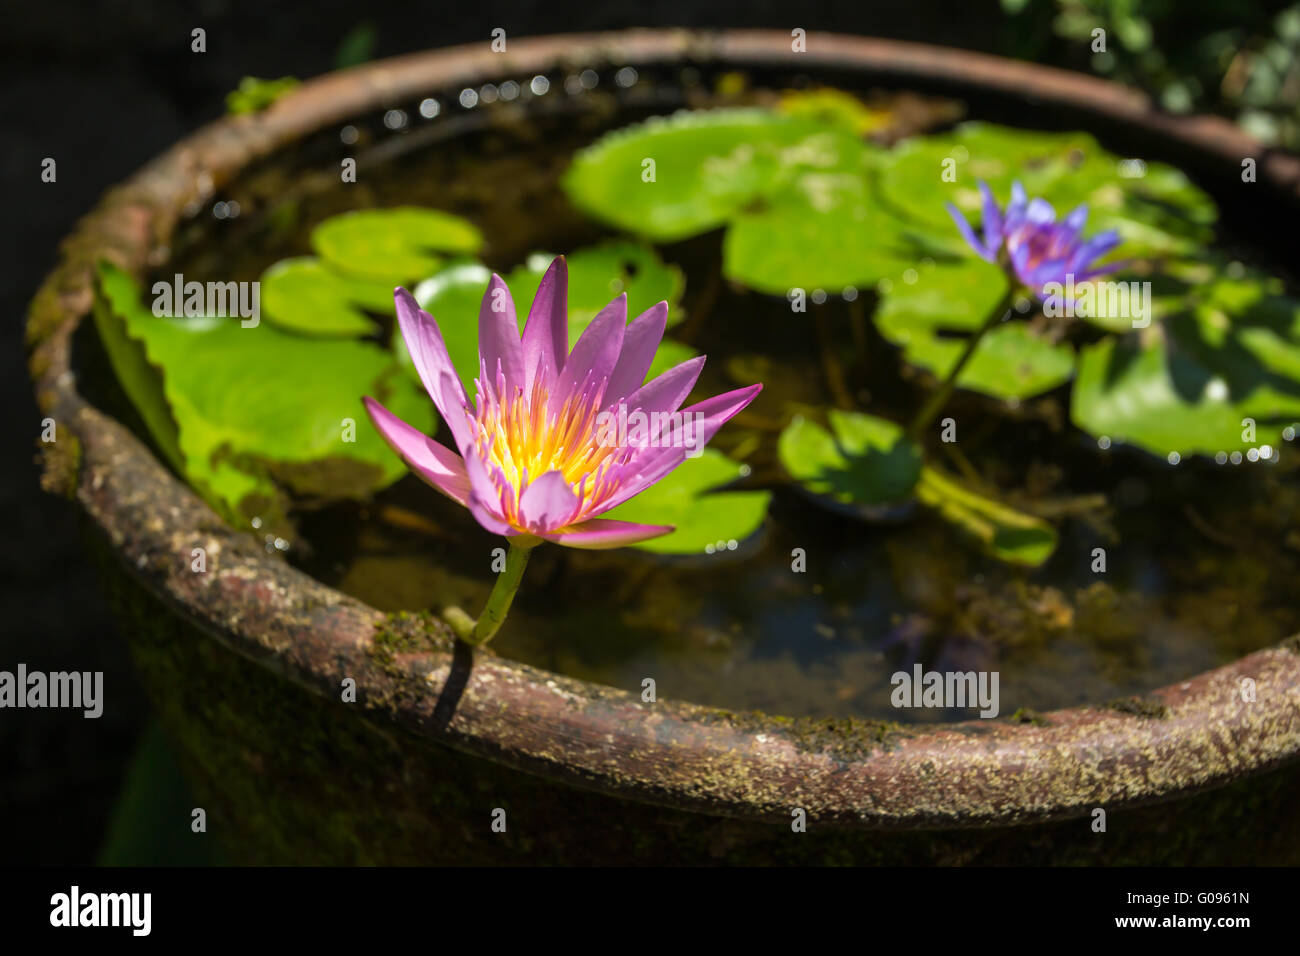 Beautiful water lily flower in a stone water pot Stock Photo